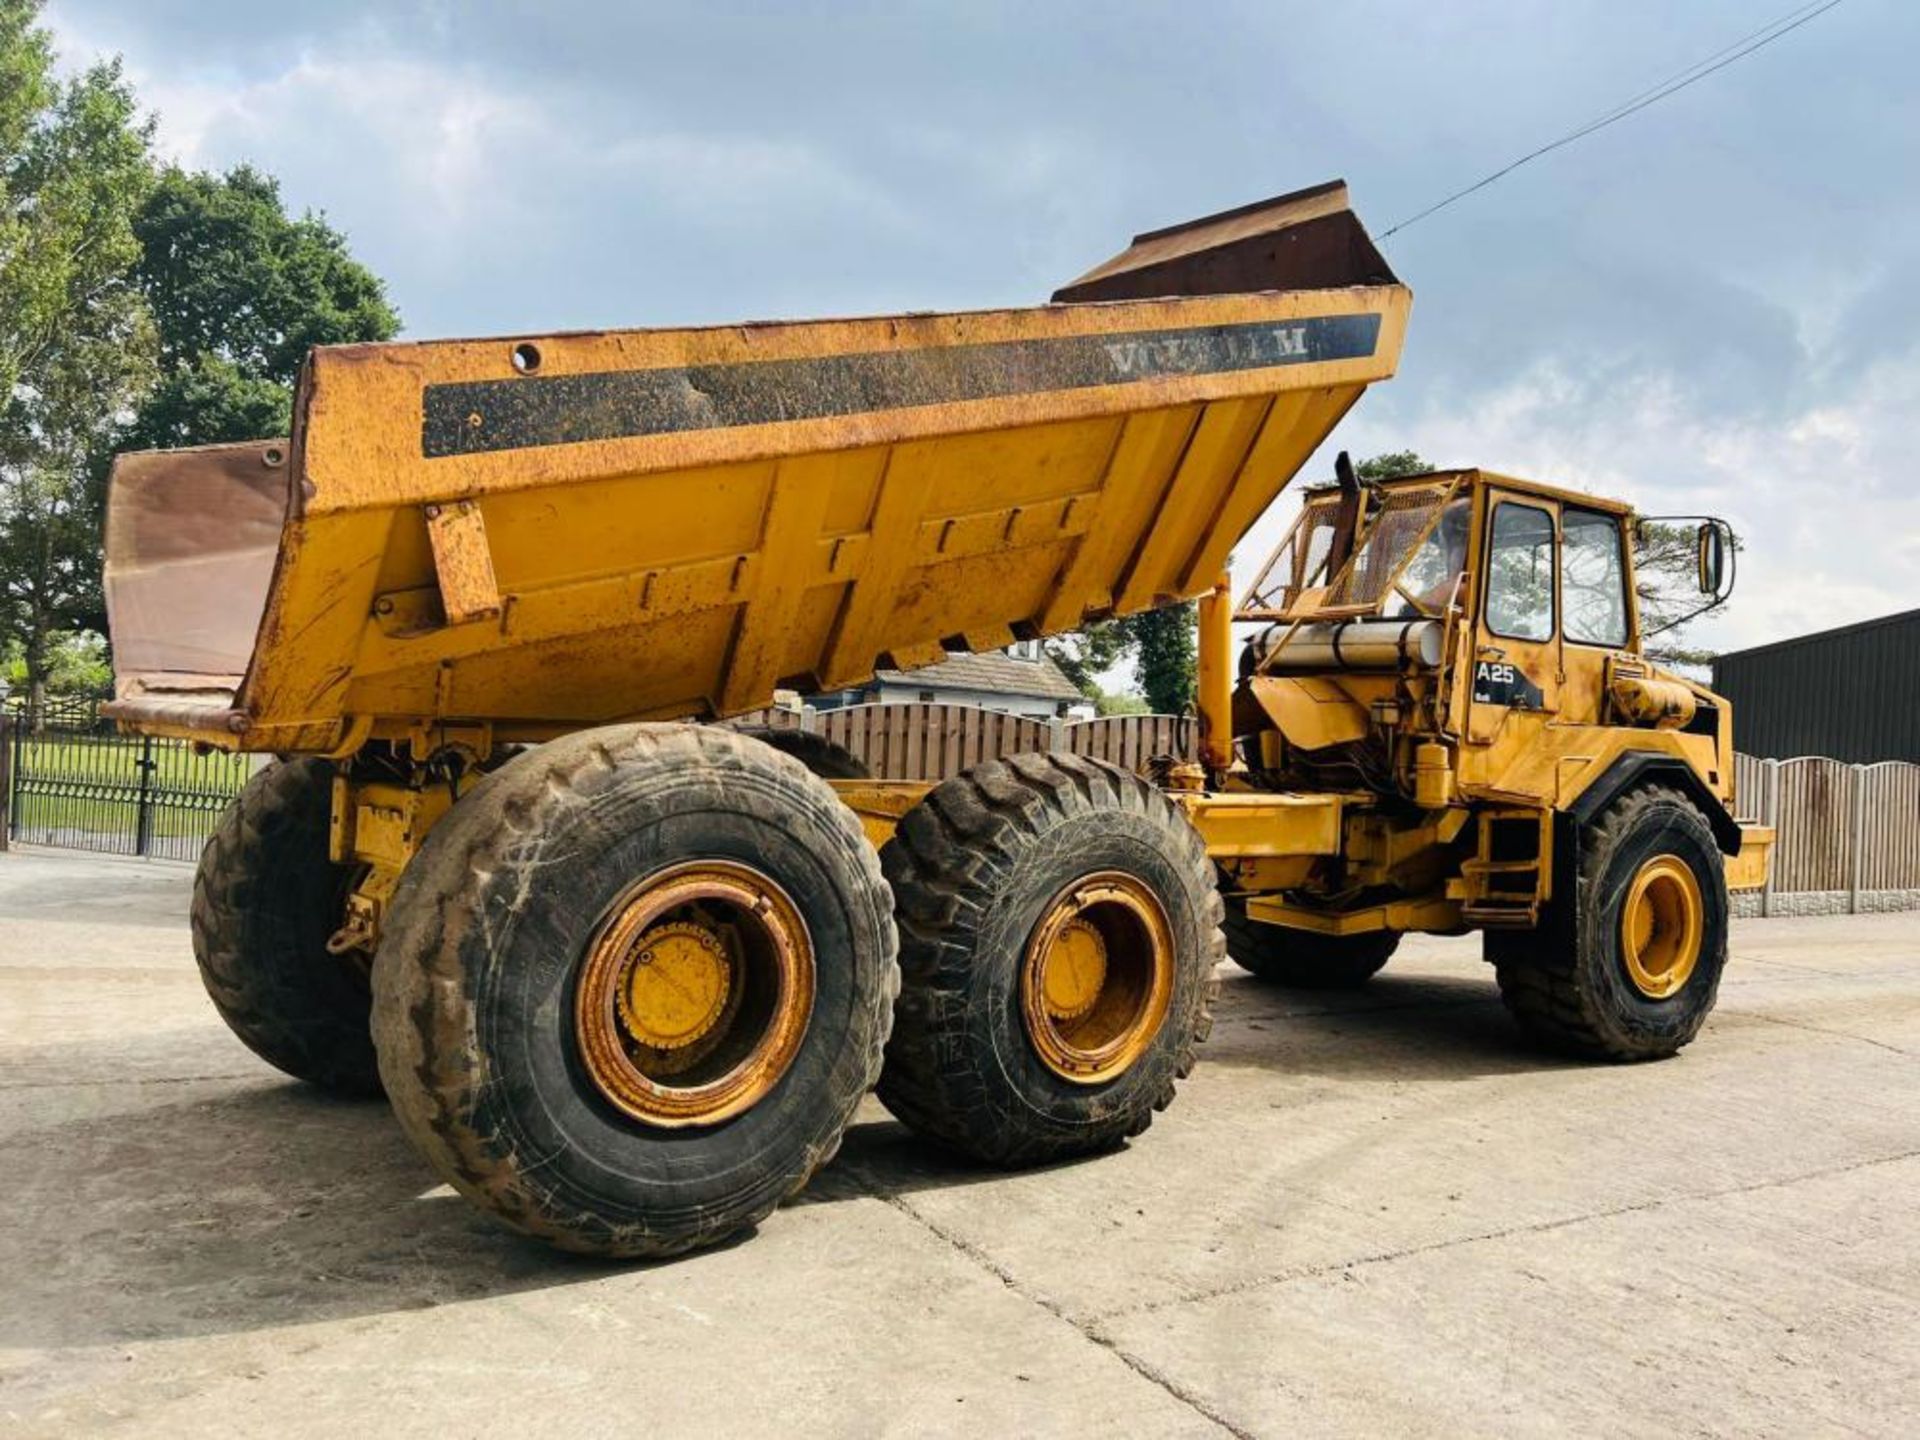 VOLVO BM A25 6X6 ARTICULATED DUMP TRUCK C/W HYDRAULIC STRAIGHT TIP - Image 7 of 17